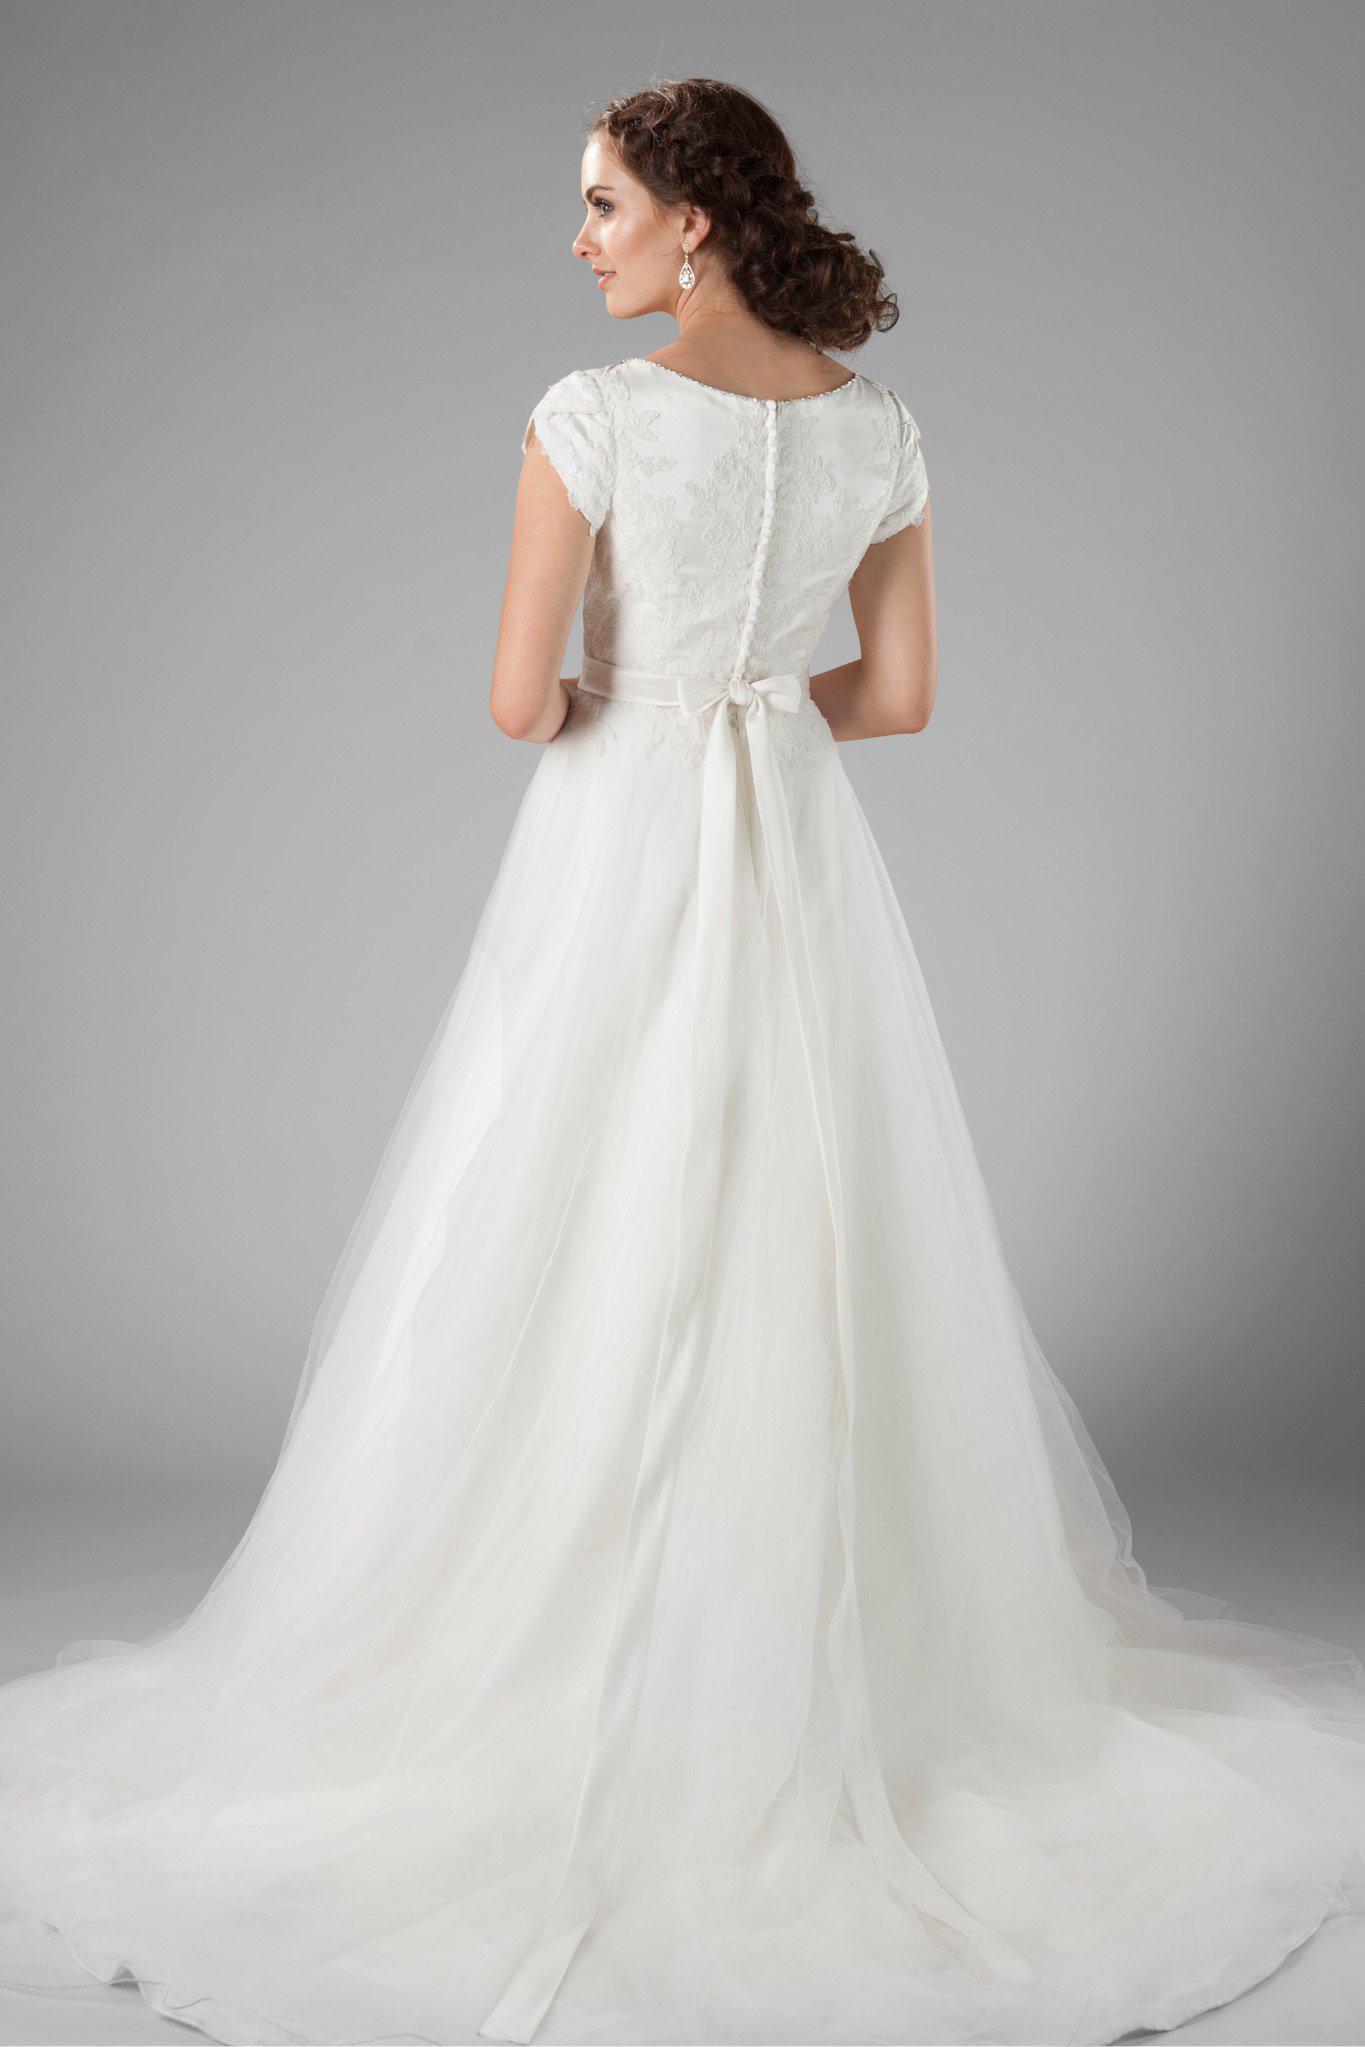 The delicate petal sleeves, the wide boat neckline and the flattering cinched waist, modest wedding dresses salt lake, back view 